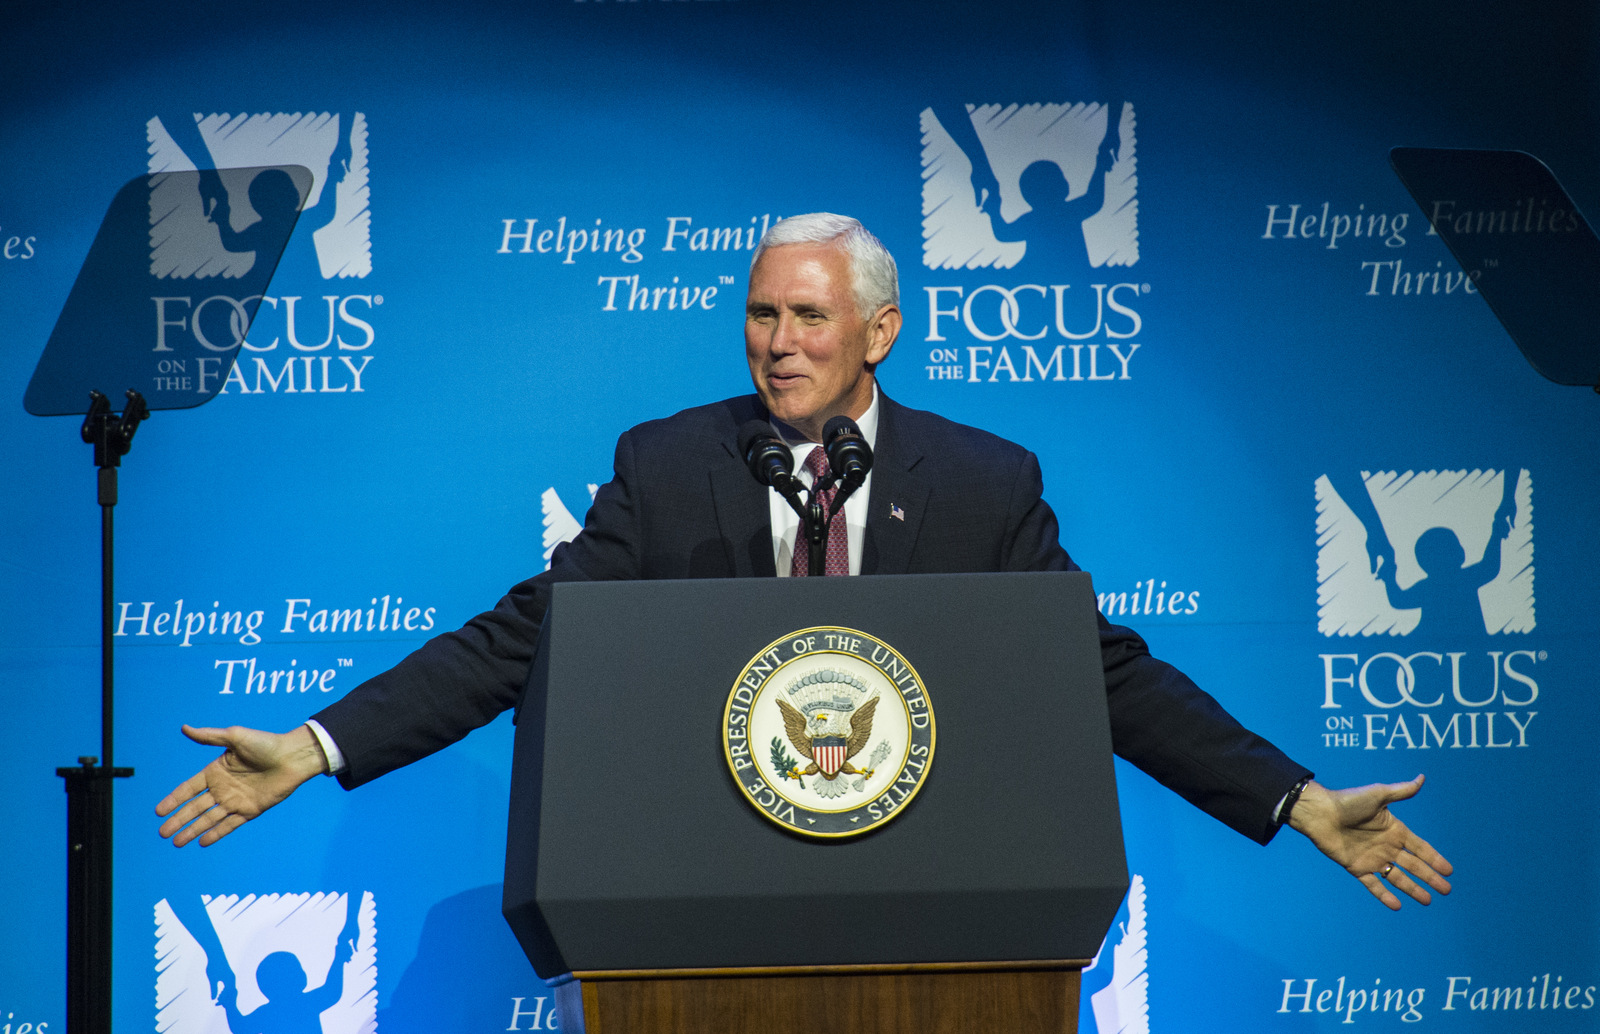 Vice President Mike Pence speaks during Focus on the Family's 40th anniversary celebration, June 23, 2017, during his visit to Colorado Springs, Colo. (Christian Murdock /The Gazette via AP, Pool)